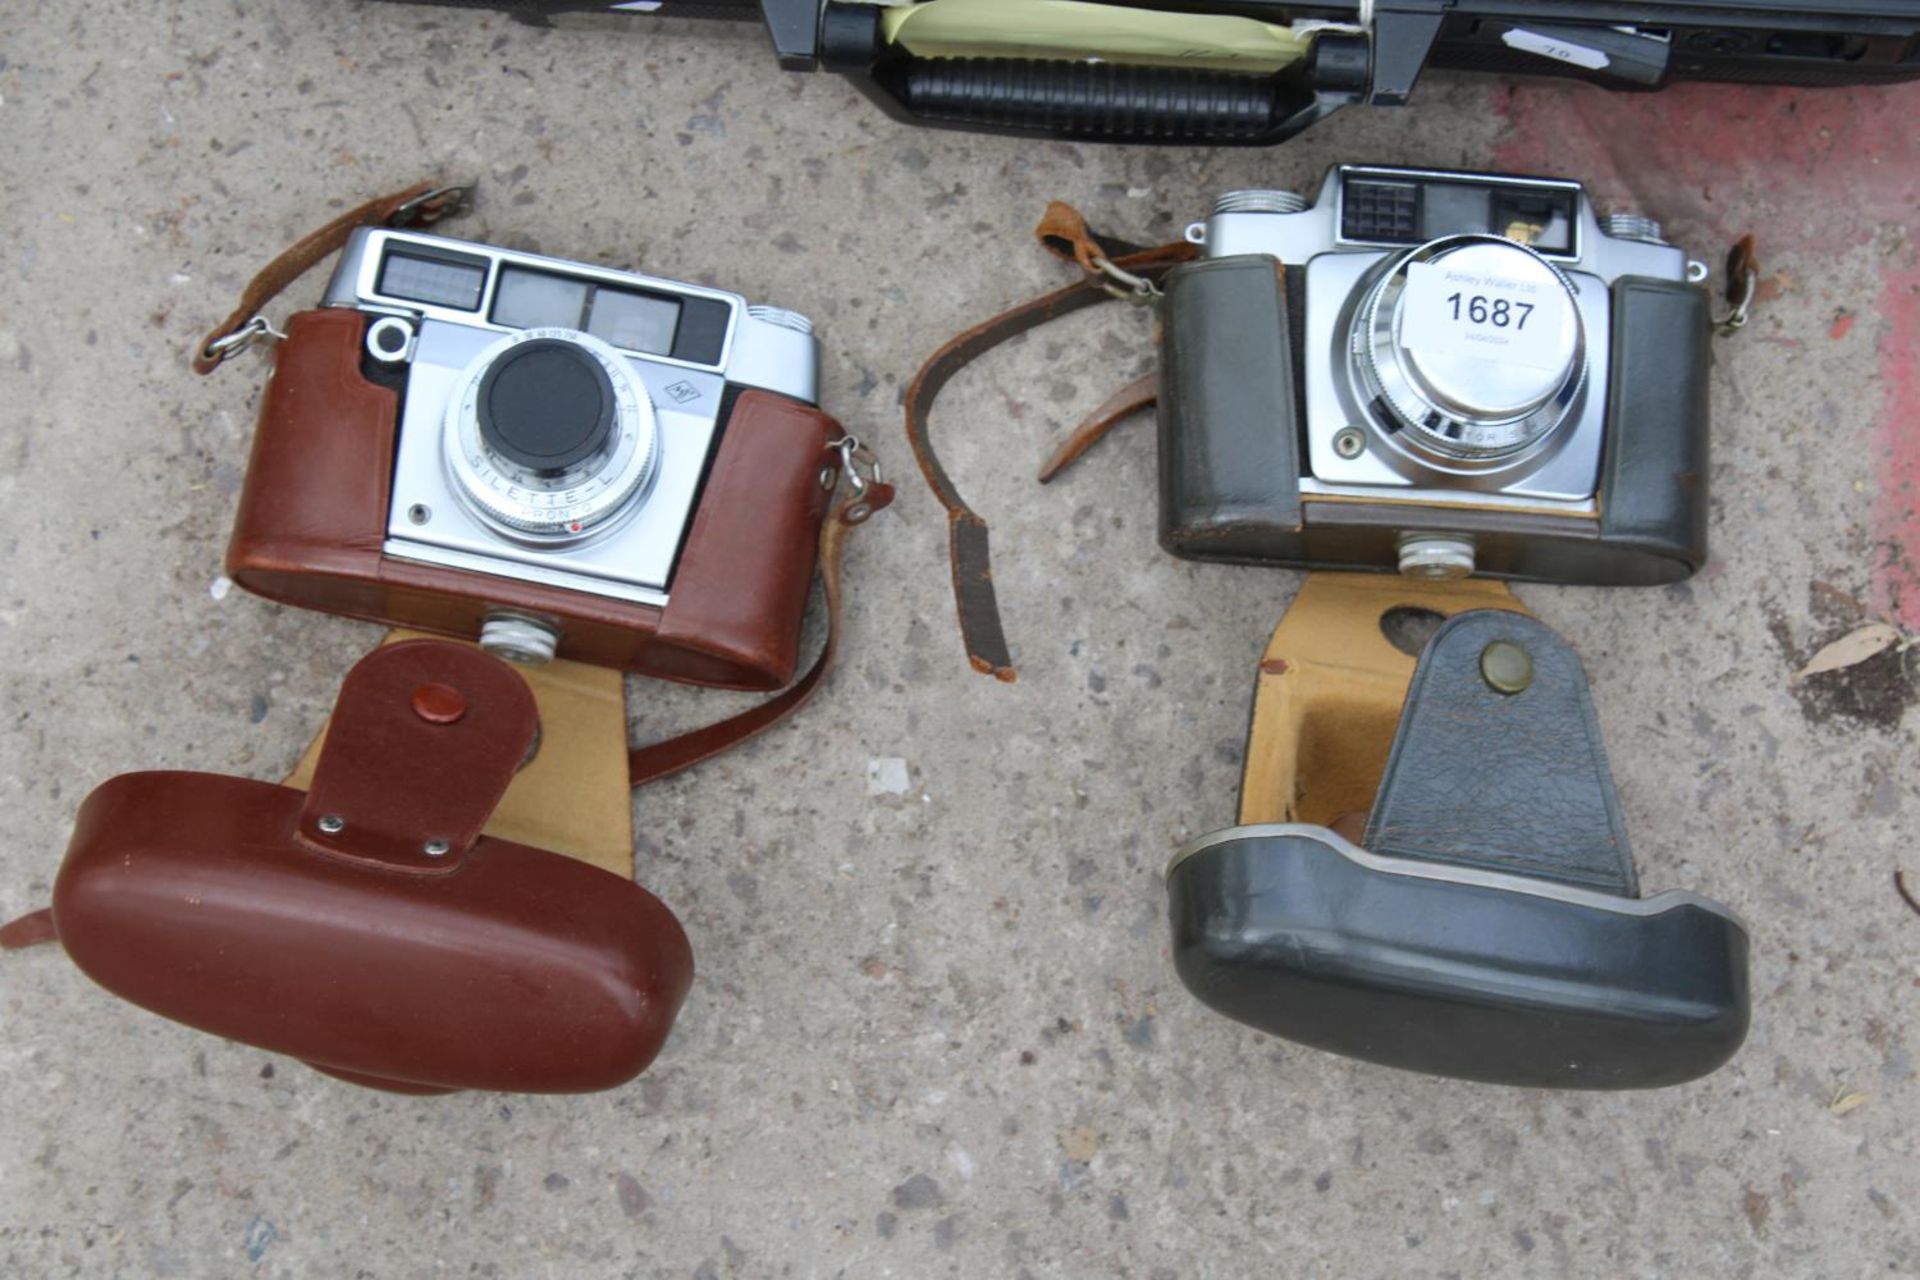 SIX VARIOUS AGFA CAMERAS IN A HARD CARRY CASE - Image 3 of 3